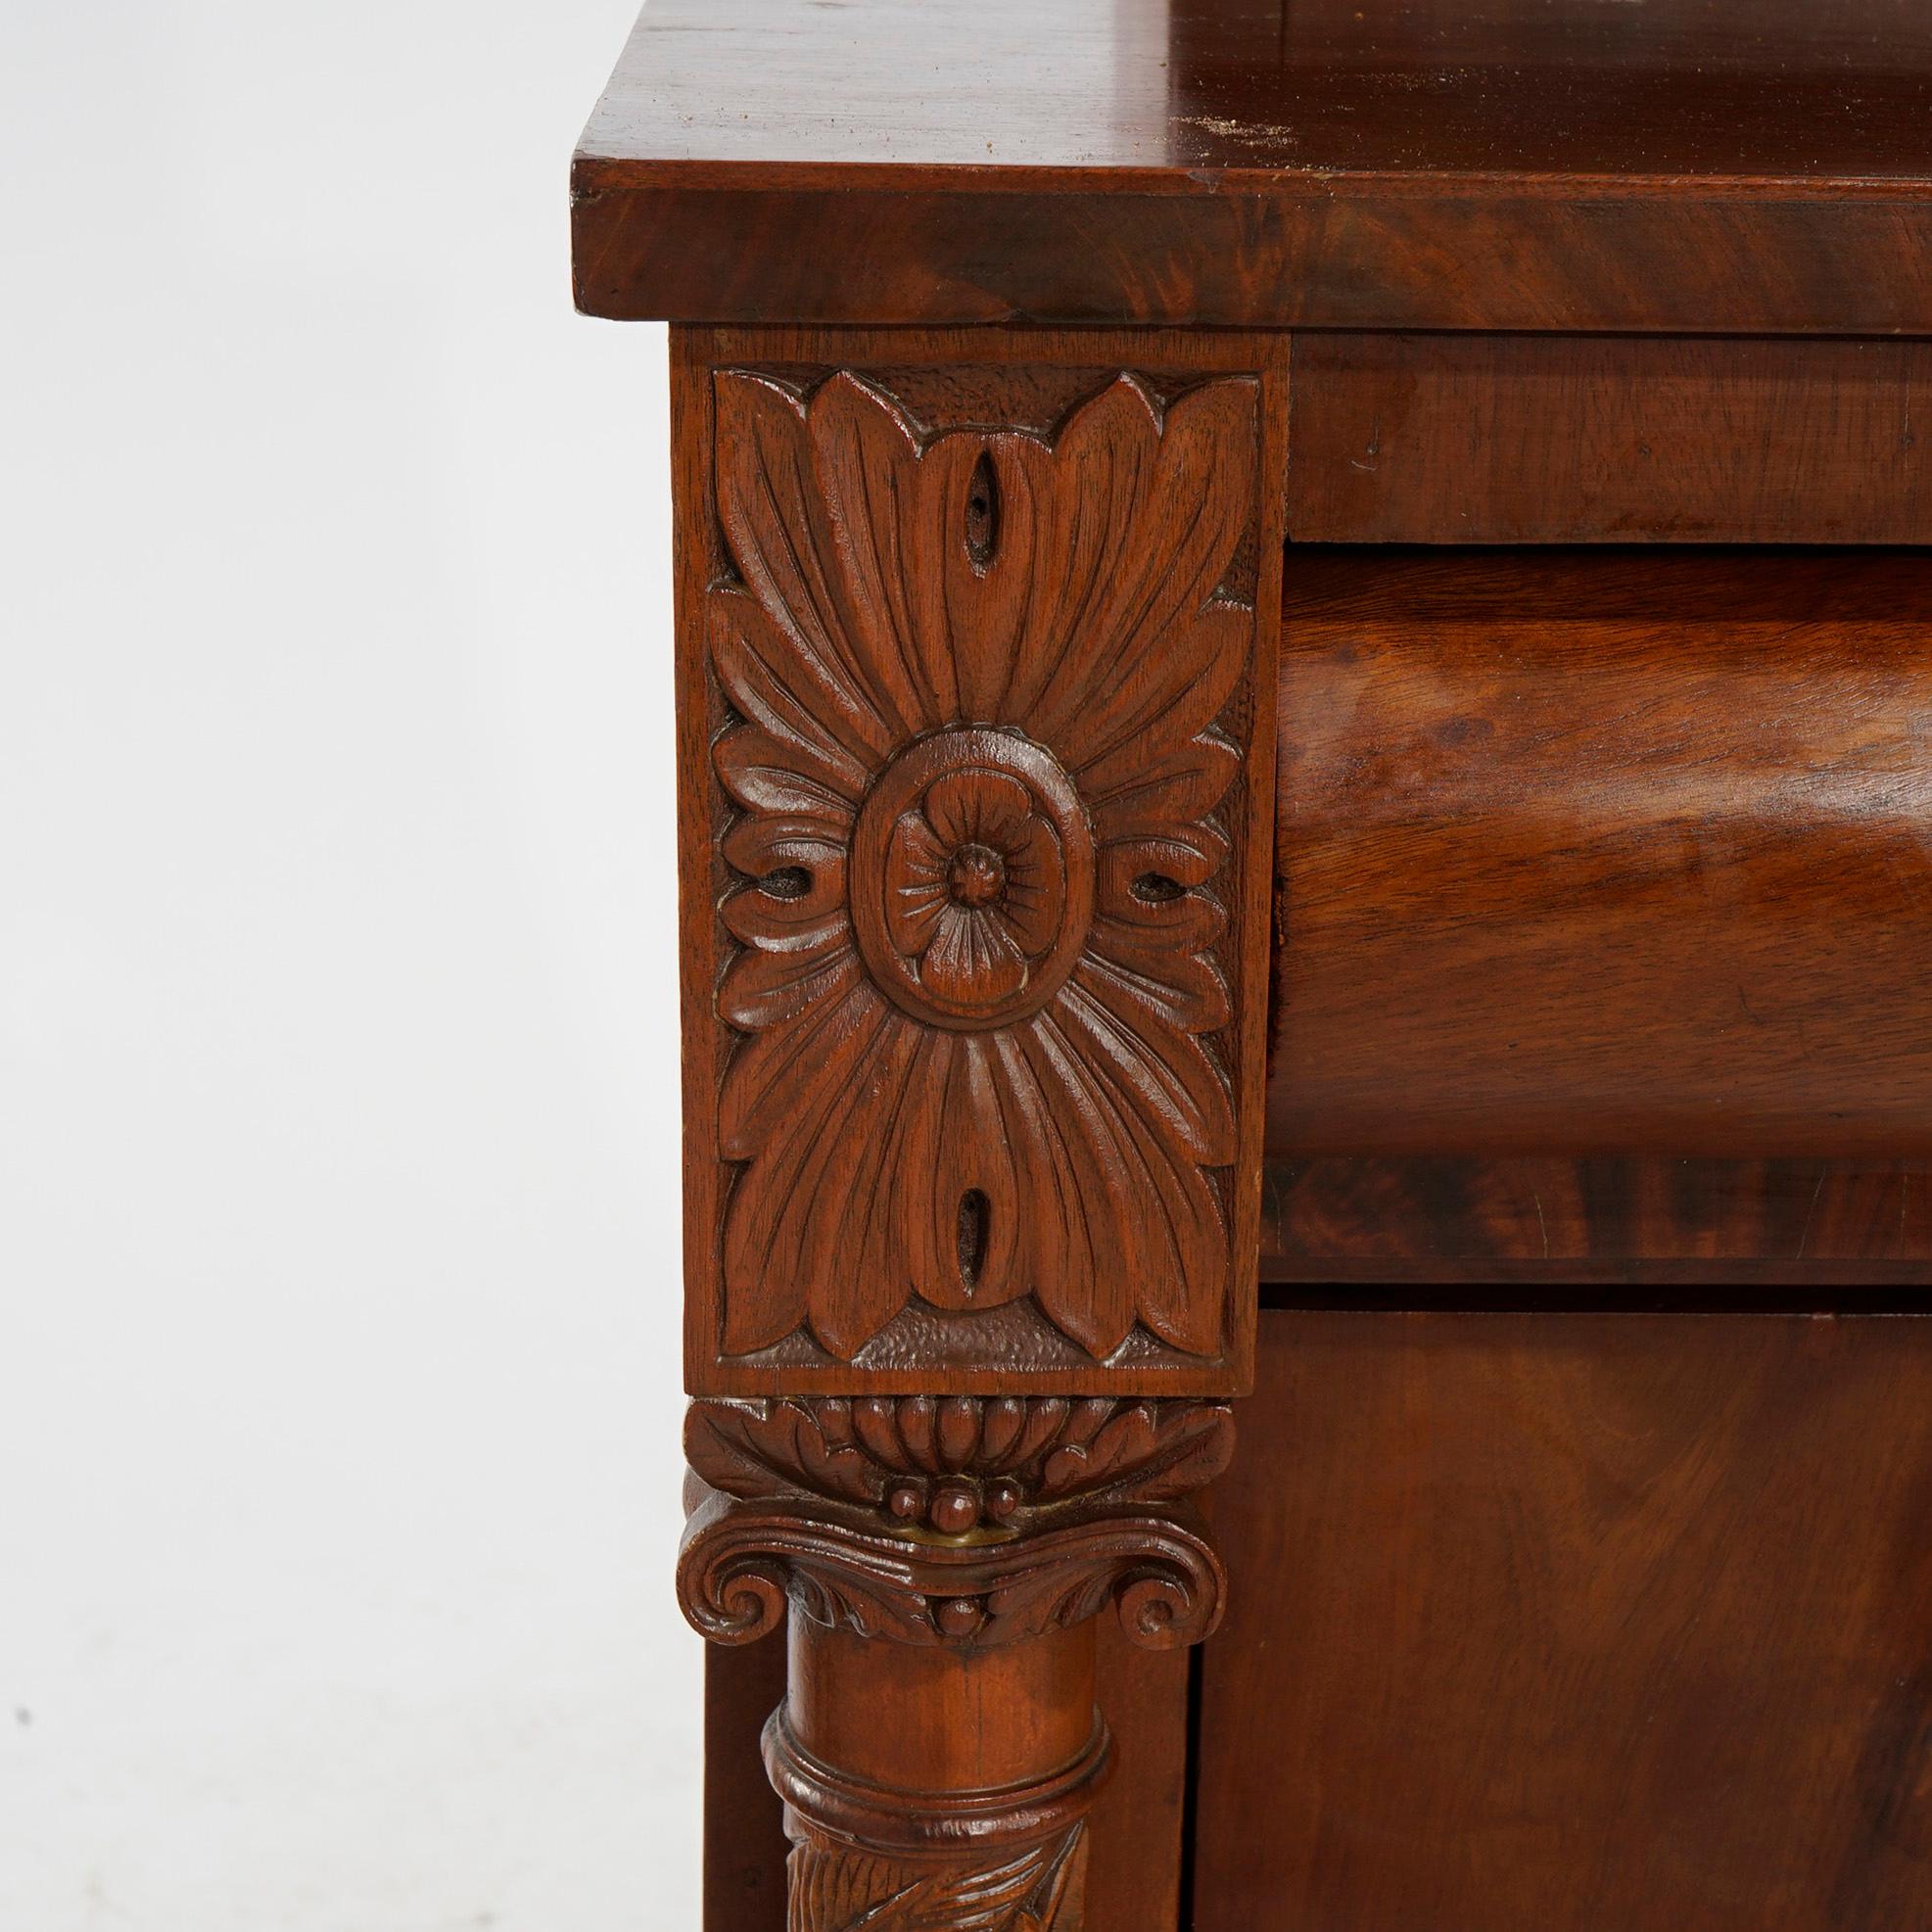 Antique American Empire Carved Flame Mahogany Dresser with Mirror, Circa 1840 For Sale 1